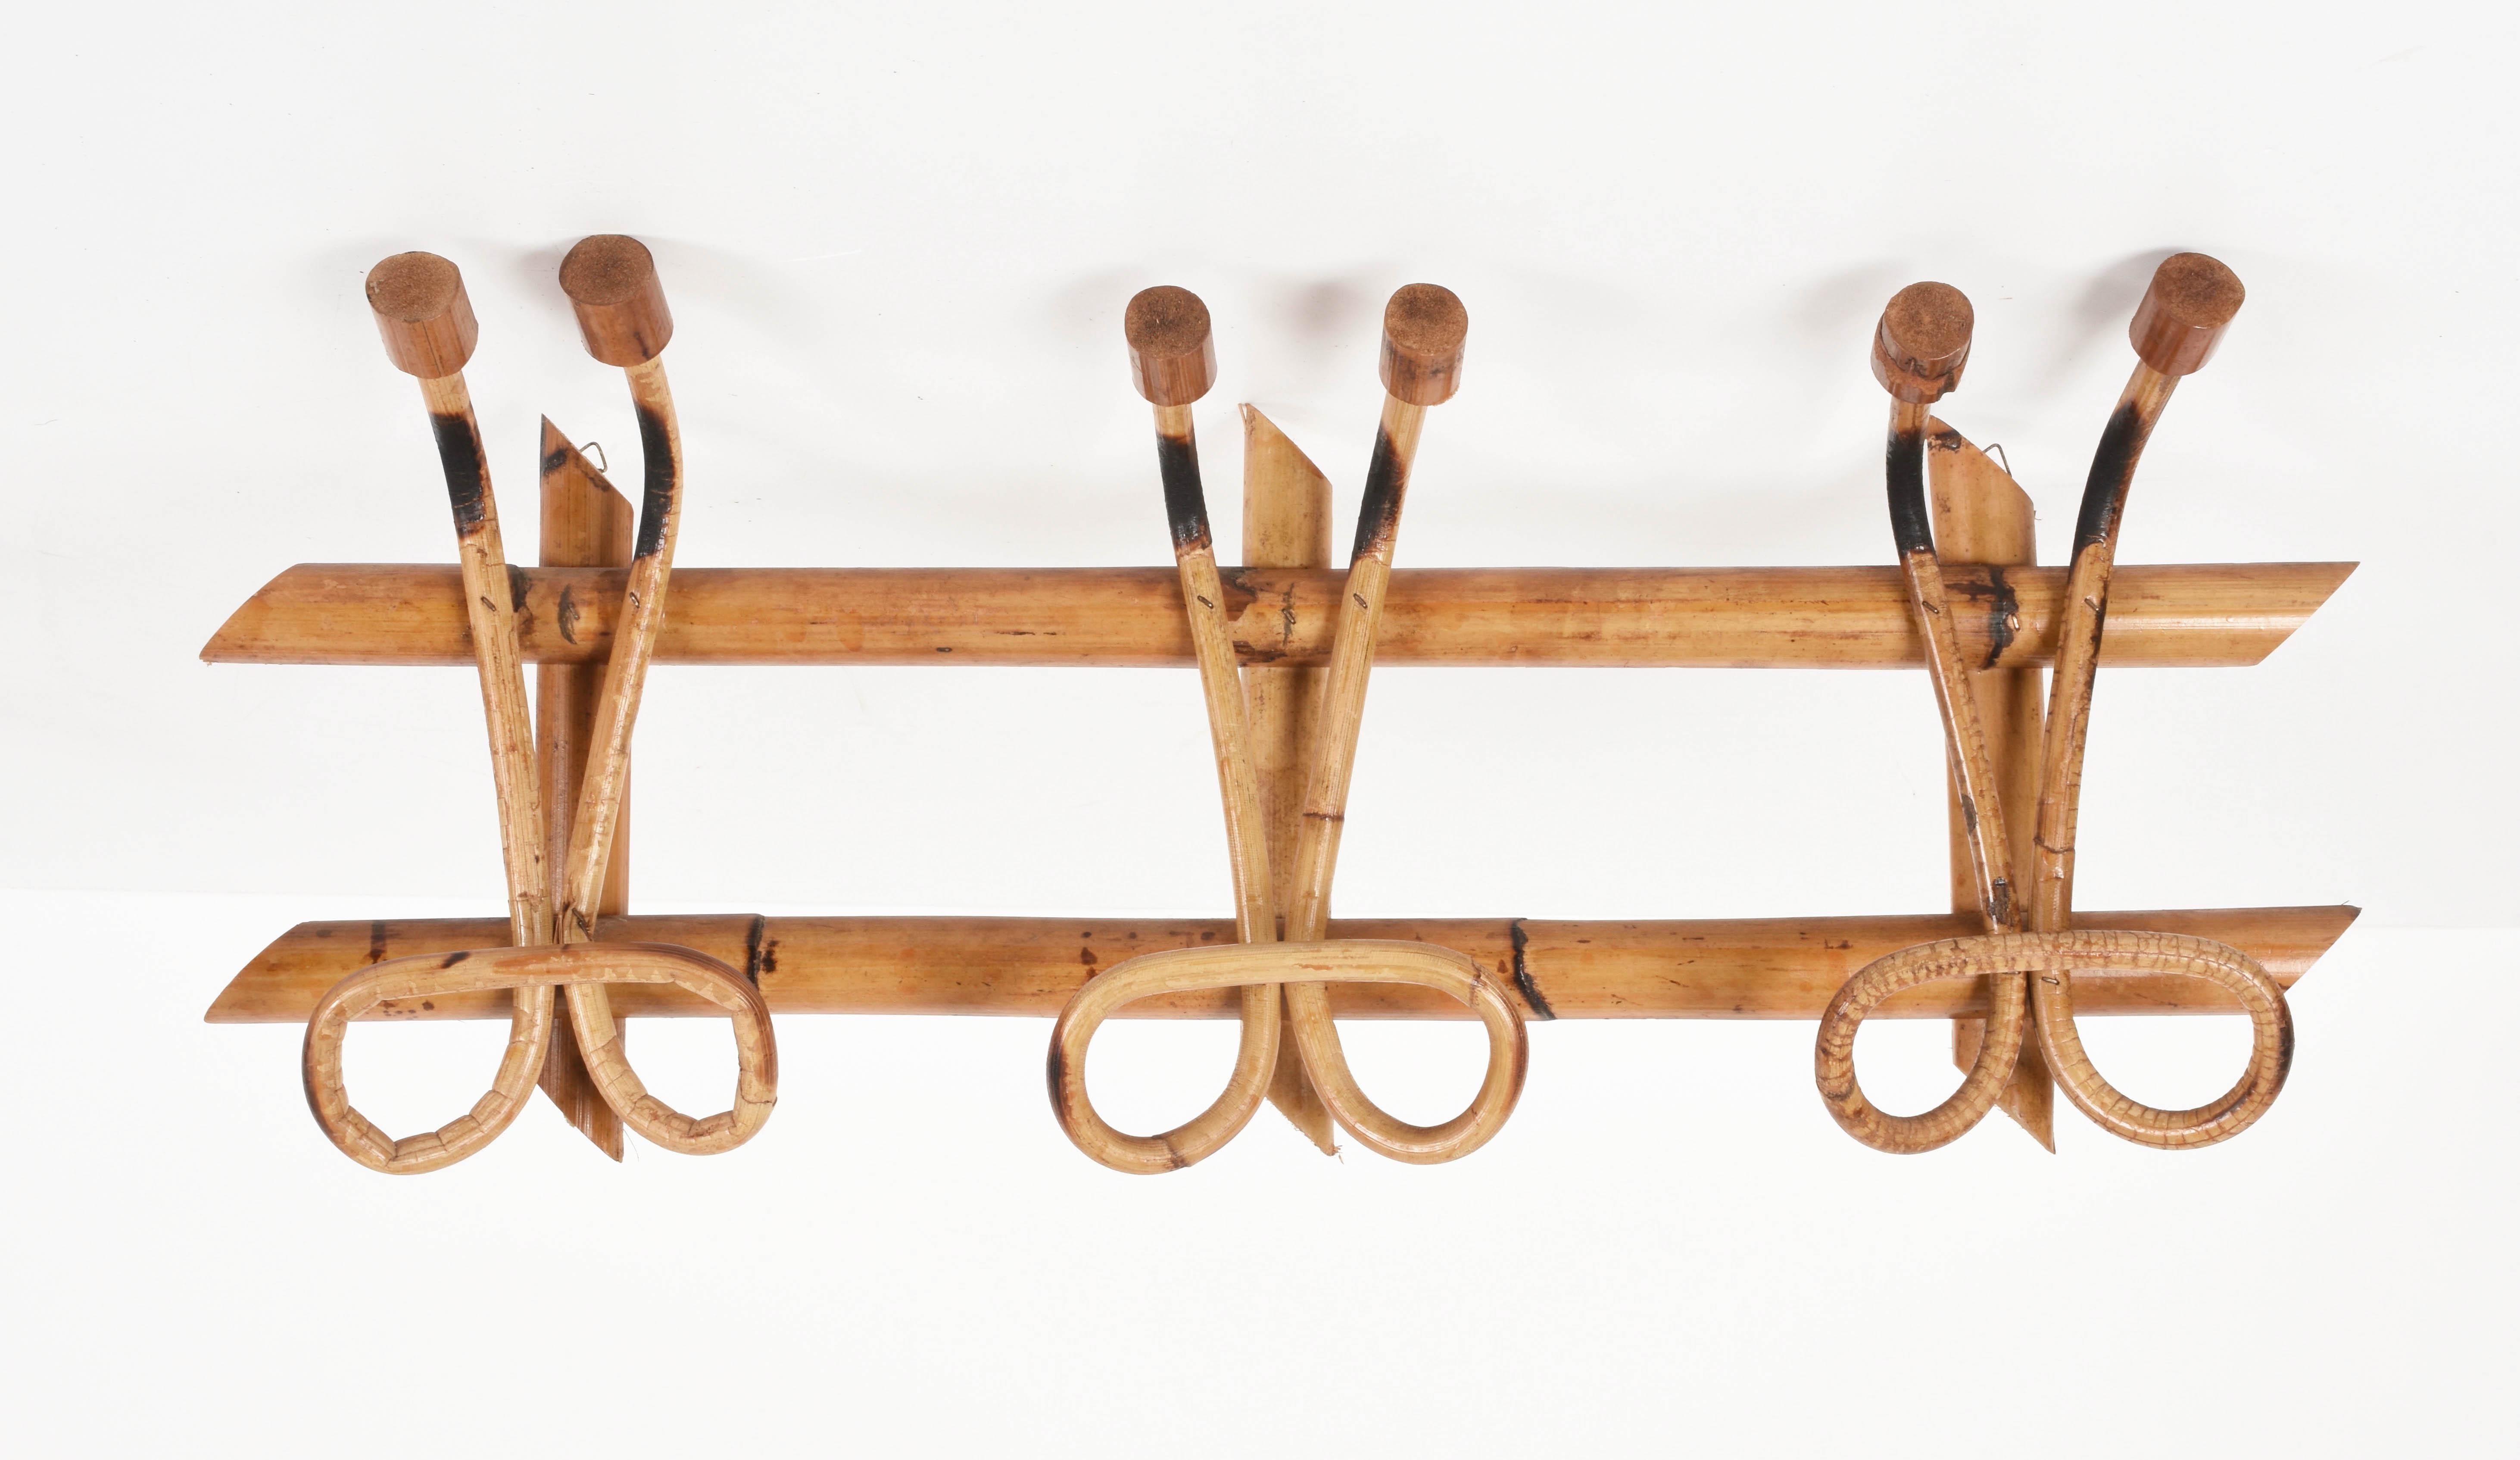 This beautiful rattan coat hanger is a French Riviera Midcentury production.

The piece was produced in Italy in 1961 and features a structure in bamboo canes and four rattan upper hooks and lower hooks for hanging clothes.

The simple elegance